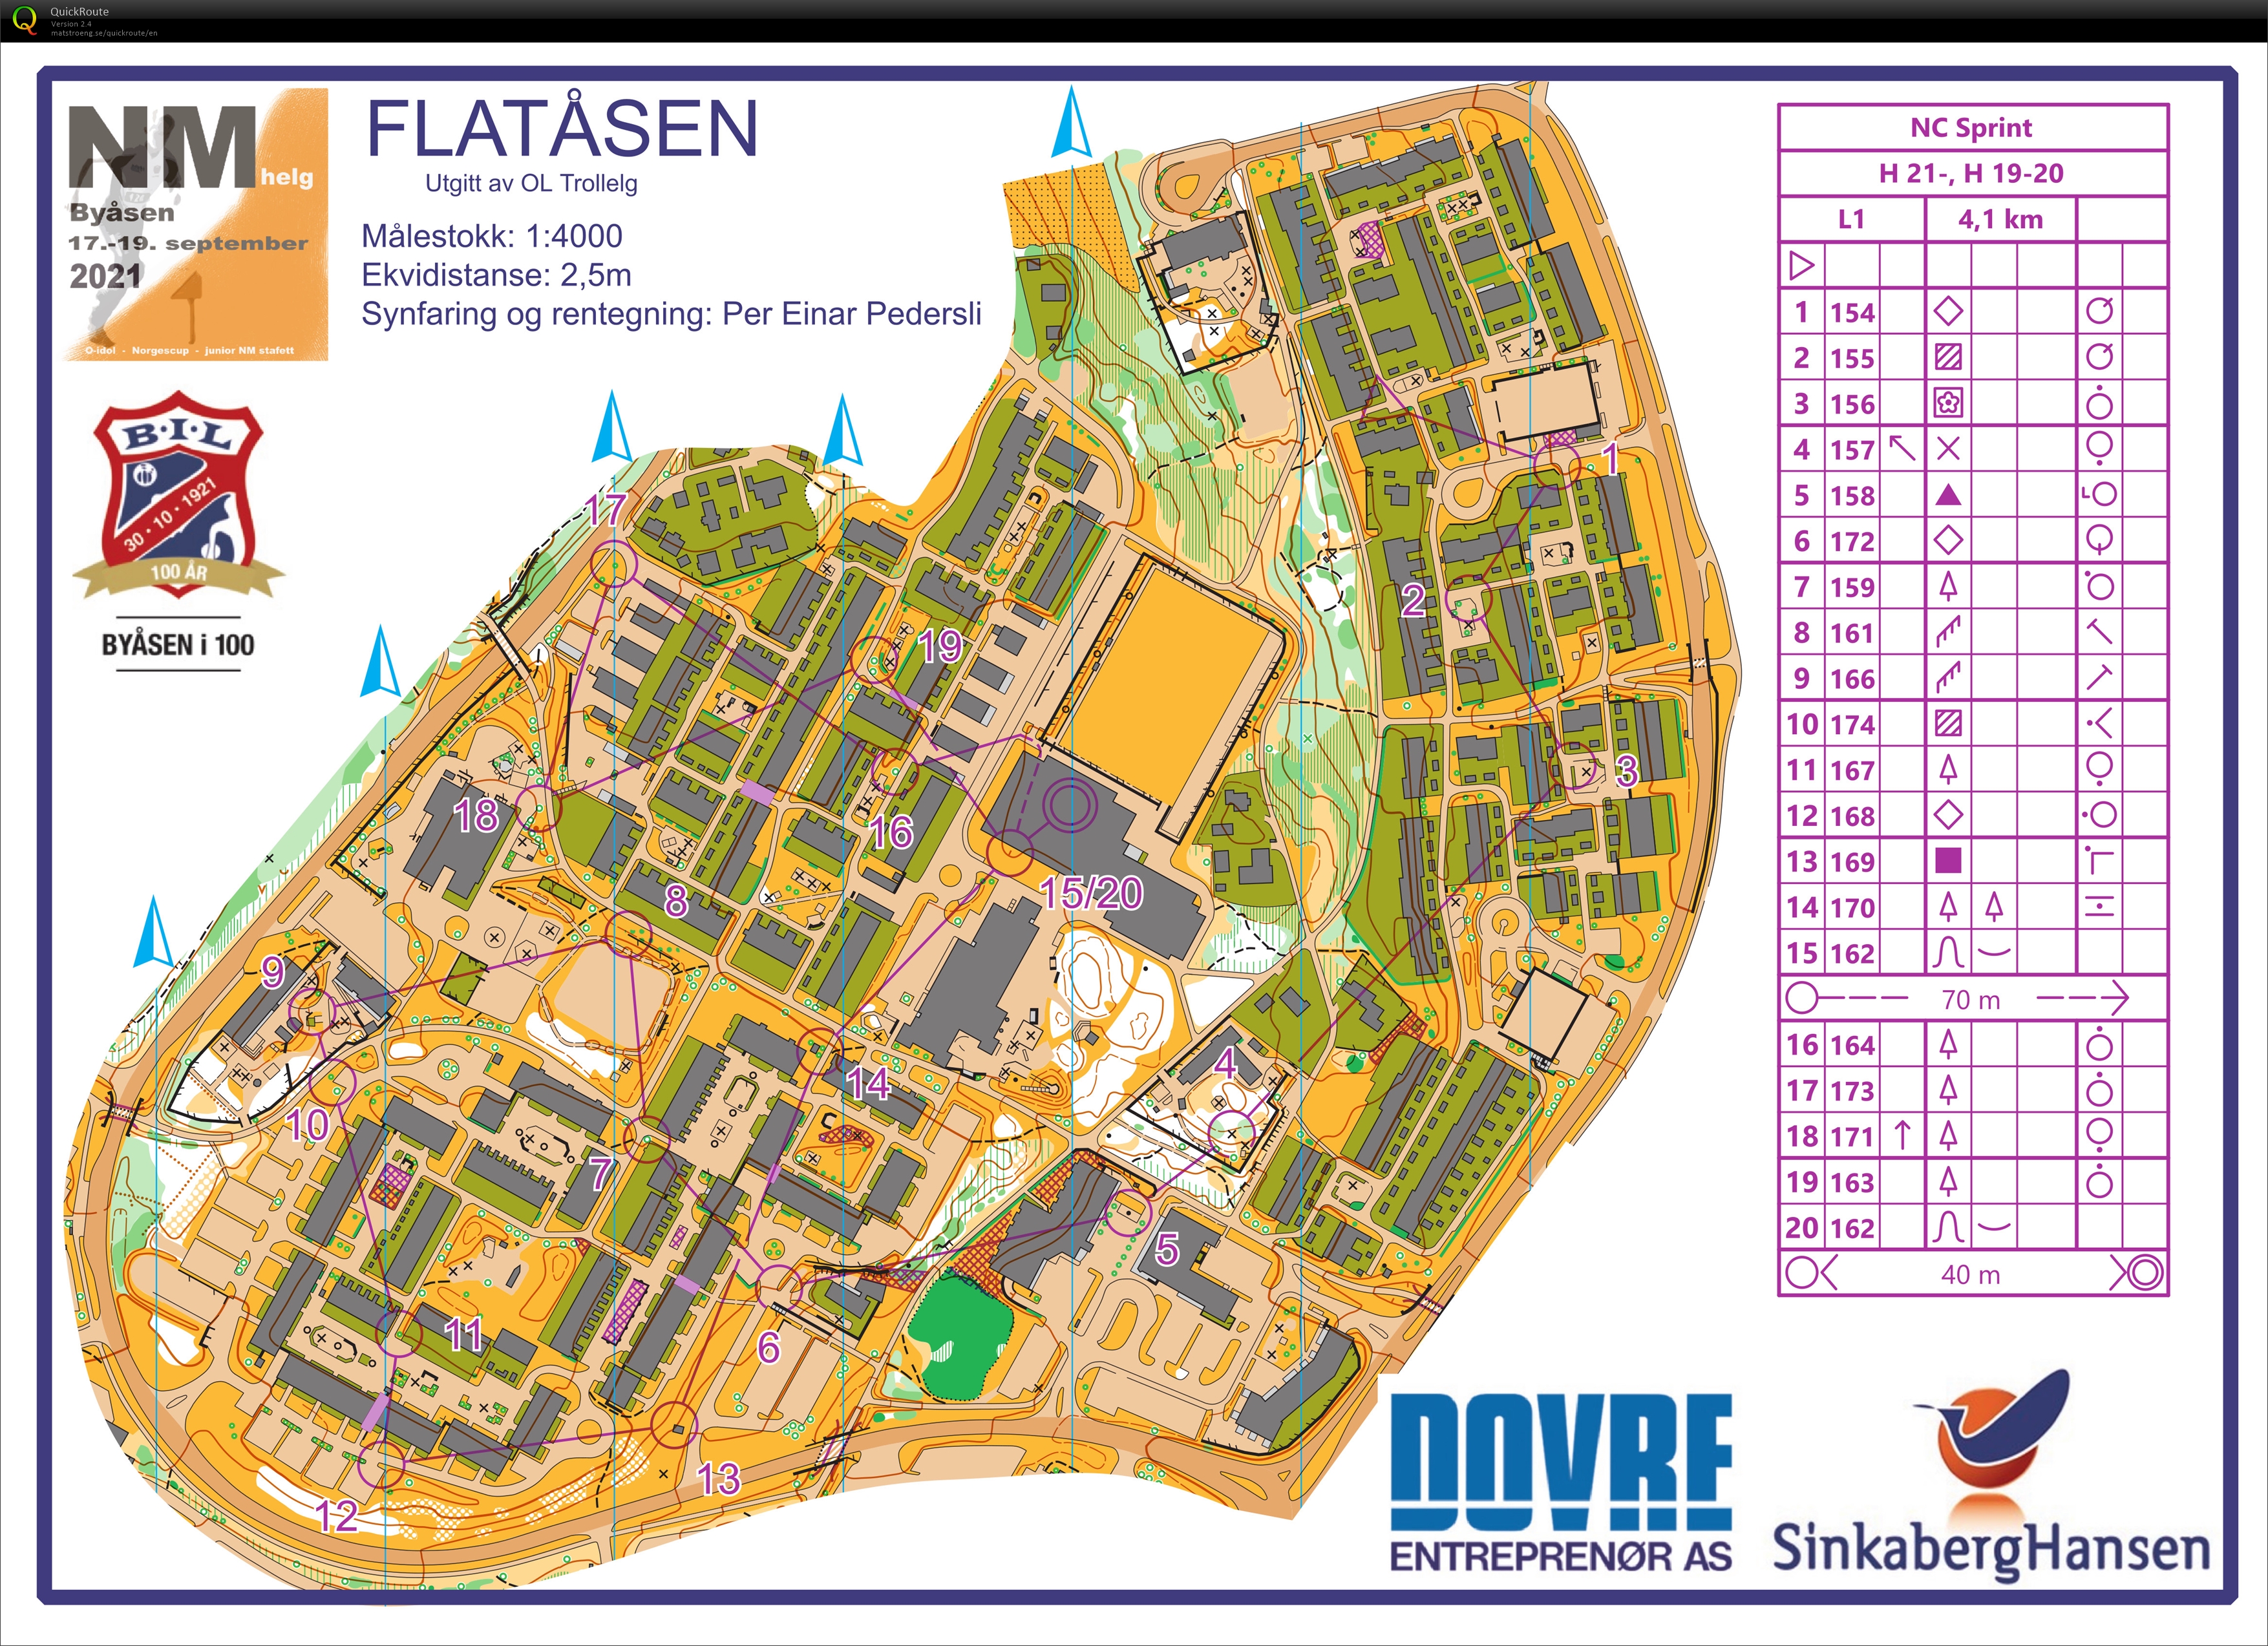 Norgescup Sprint (17-09-2021)